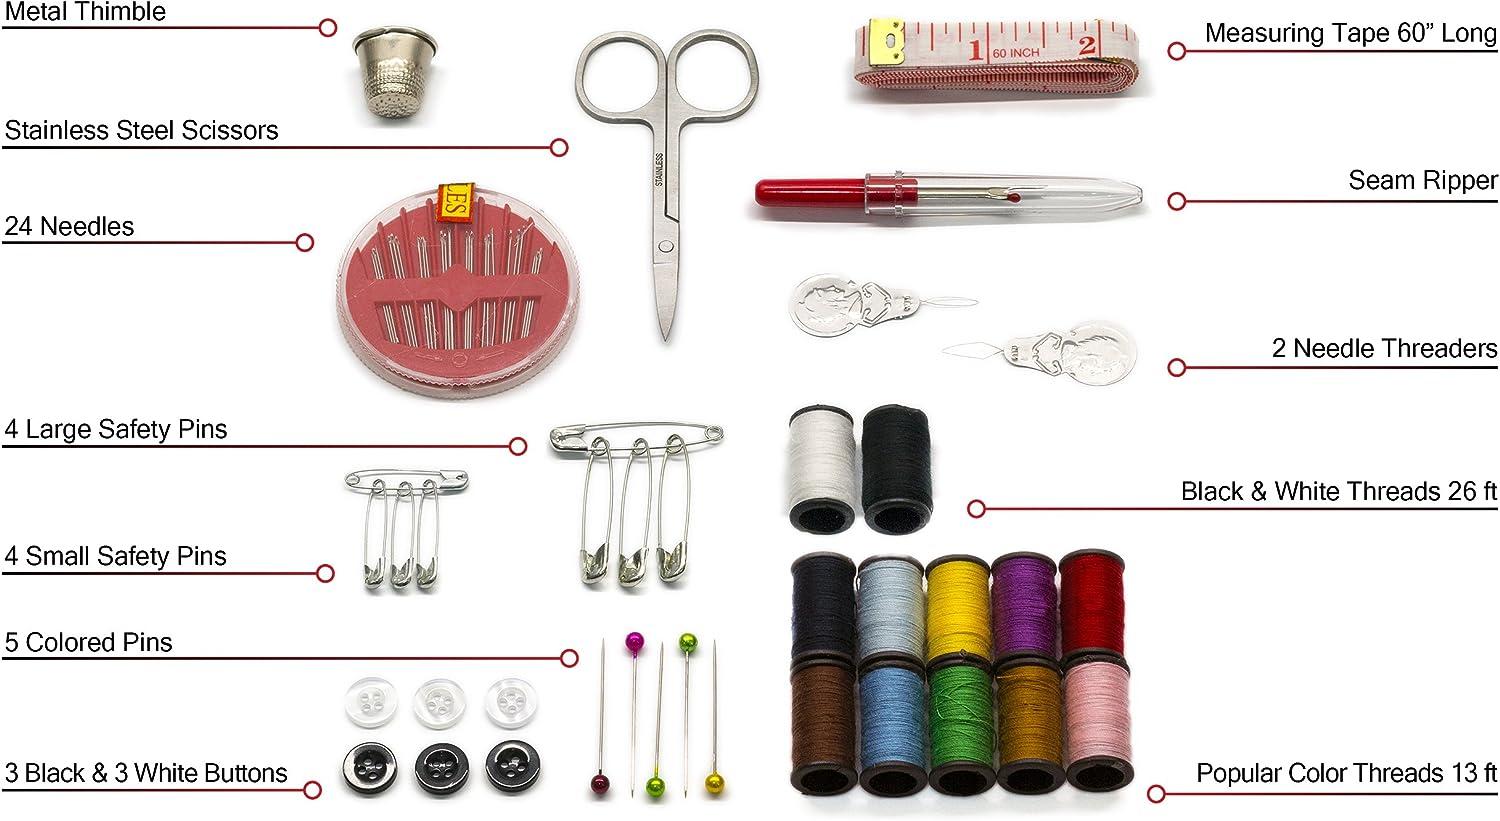  Easy To Use Sewing Kit For Adults - Over 100 Sewing Supplies  And Accessories